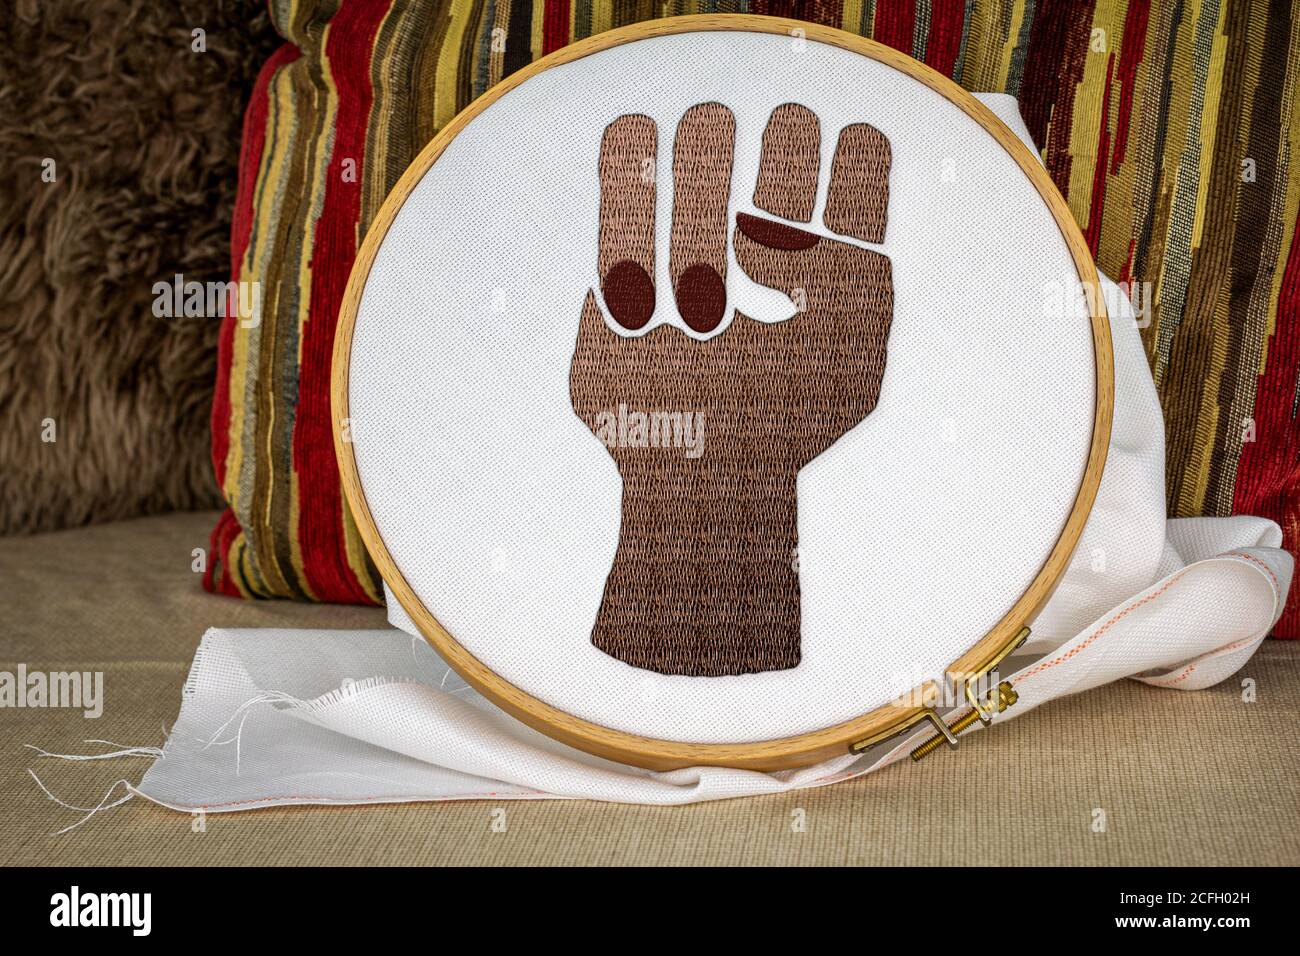 Black embroidered raised power fist on sewing hoop, activism through craft, craftivism, black lives matter, feminism, senior women joining in protests Stock Photo